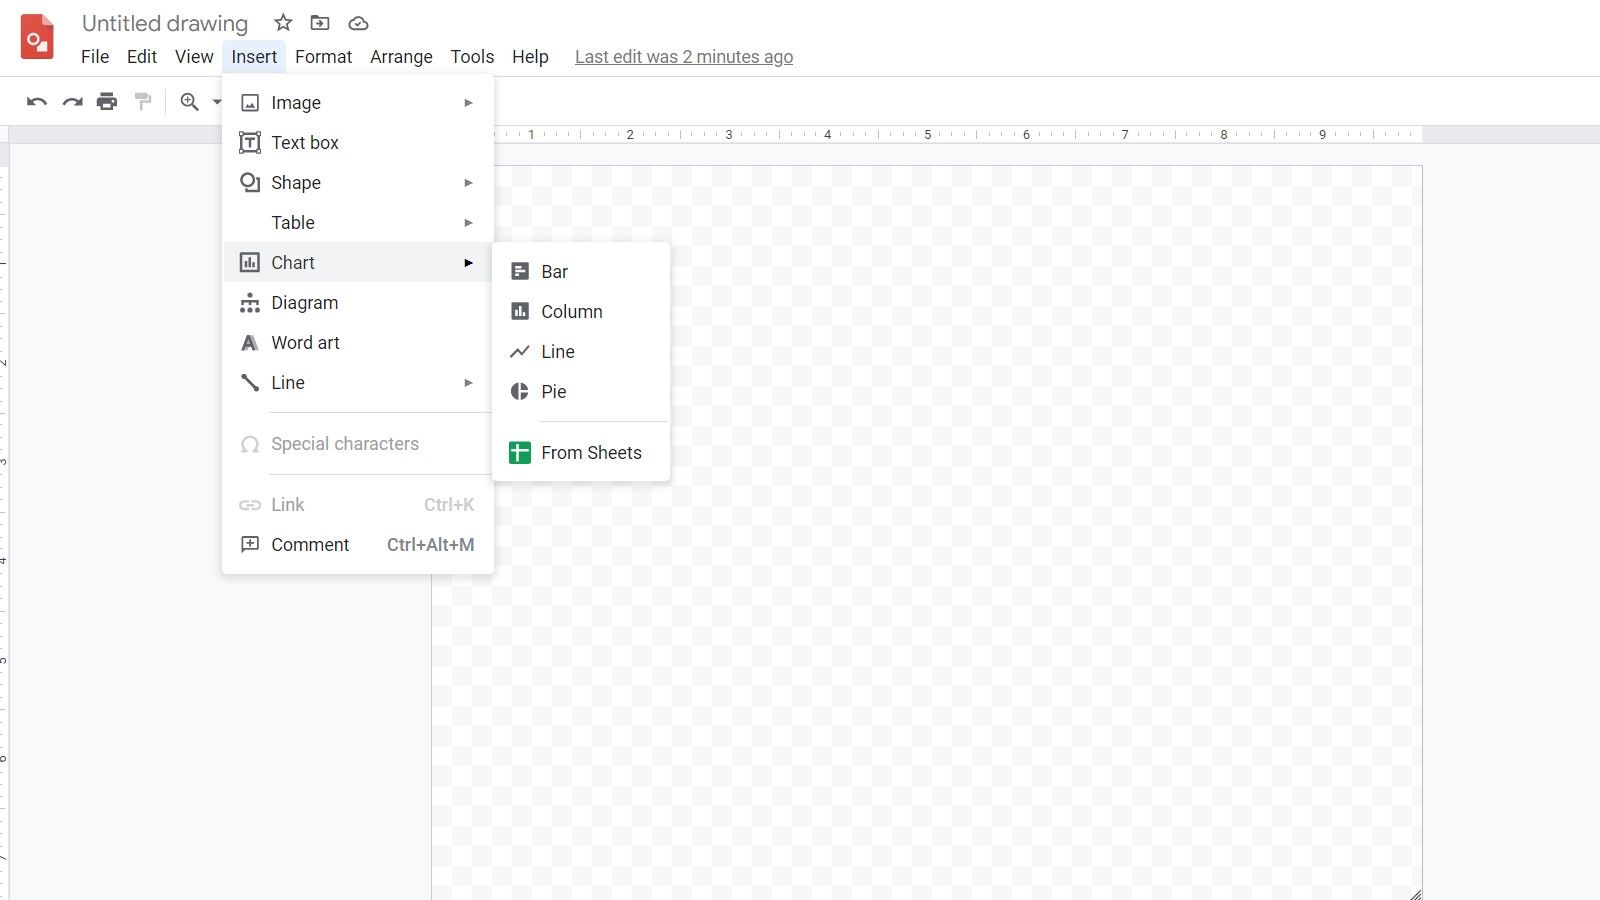 Go to the Insert menu to find other types of objects that can be inserted in a Google Docs drawing